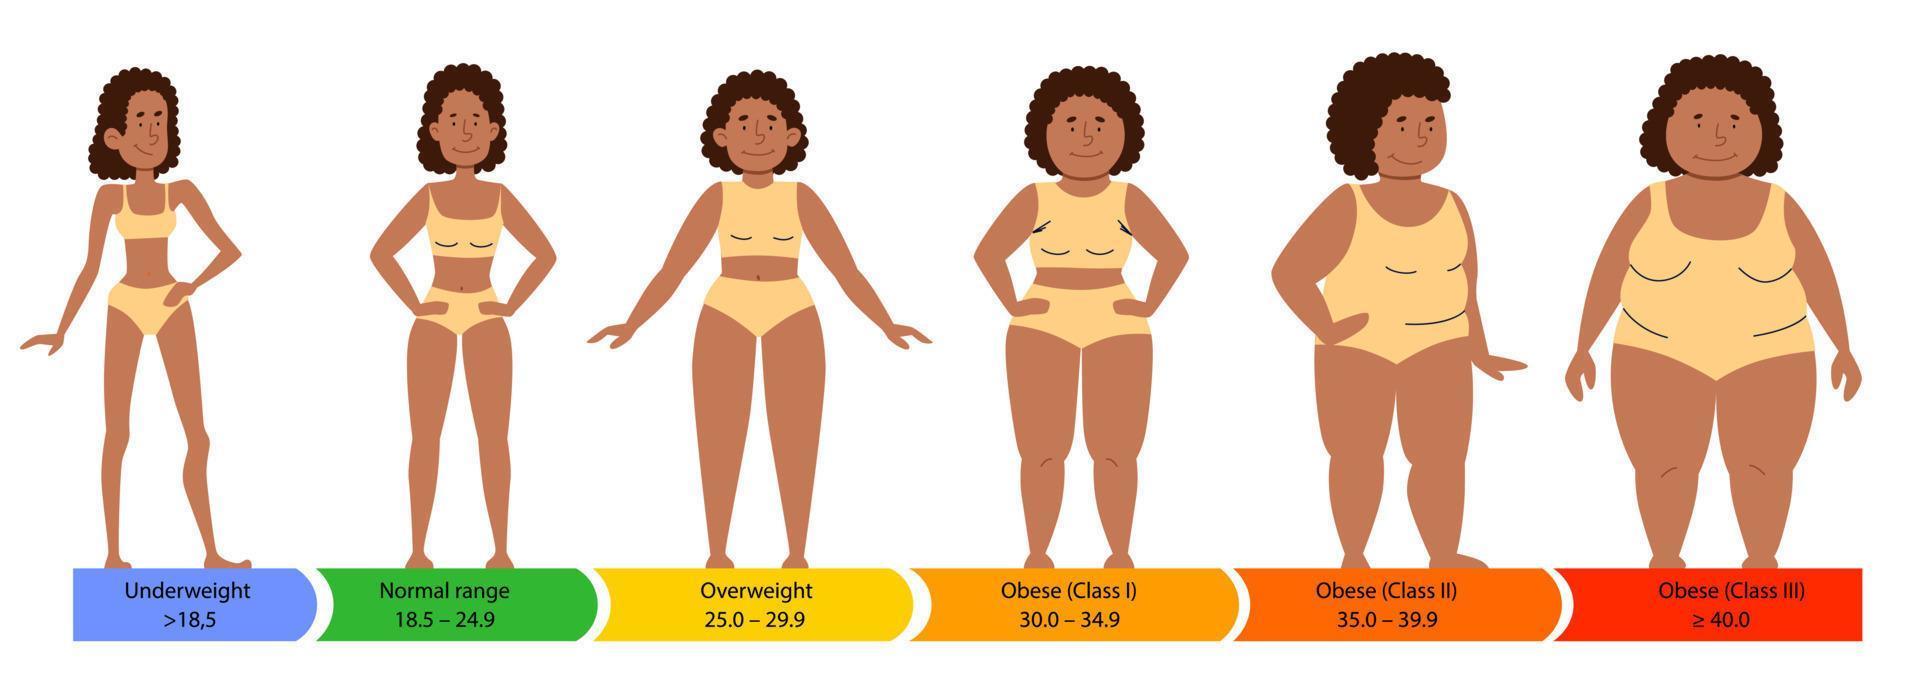 Woman body in different weight categories. Illustration of female